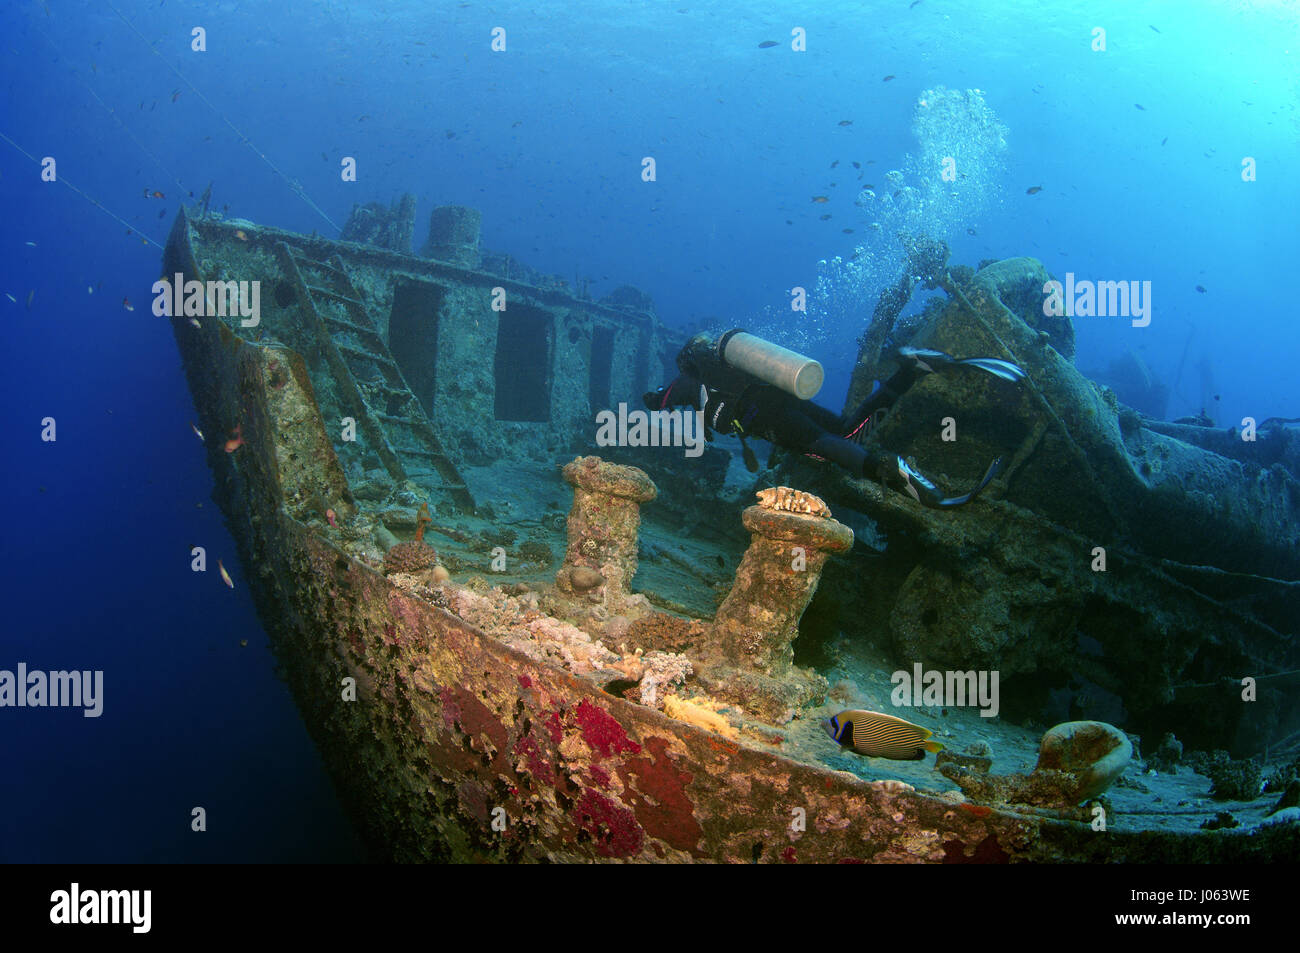 A diver swims around the wreck of SS Thistlegorm. EERIE underwater pictures show inside the wreckage of the sunken British World War Two ship SS Thistlegorm on the seventy-fifth anniversary of her sinking. The series of images show the rusted remains of the merchant navy ship’s cargo which includes motorbikes, army trucks and an aircraft propeller. Other pictures show how sea life have been inhabiting the wreckage. Stock Photo